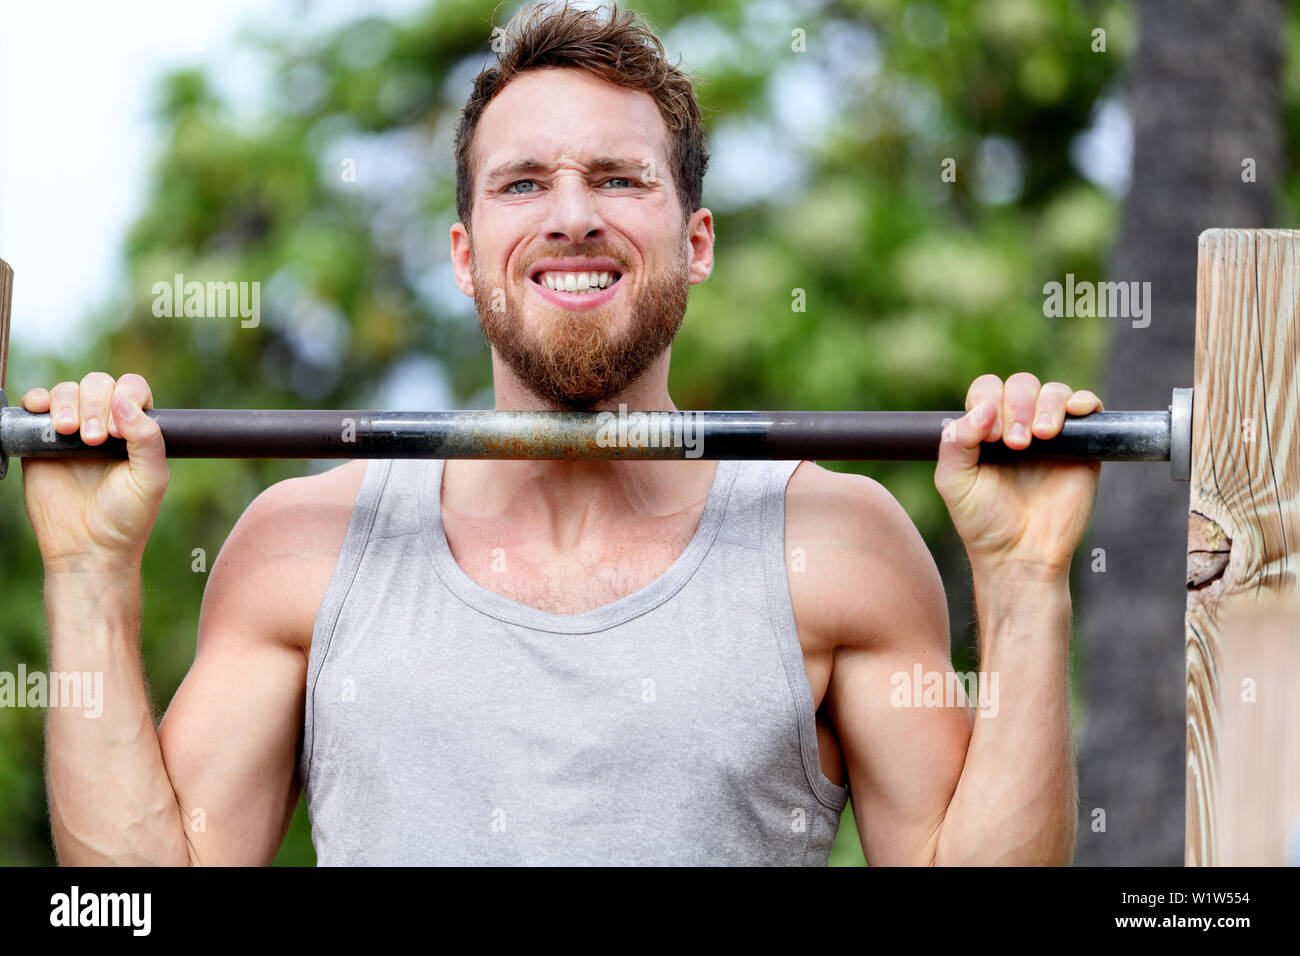 Crossfit fitness man exercising chin-ups workout. Young male adult trainer athlete portrait closeup with hands holding on monkey bars at outdoor gym doing a chin-up strength training muscle exercise. Stock Photo